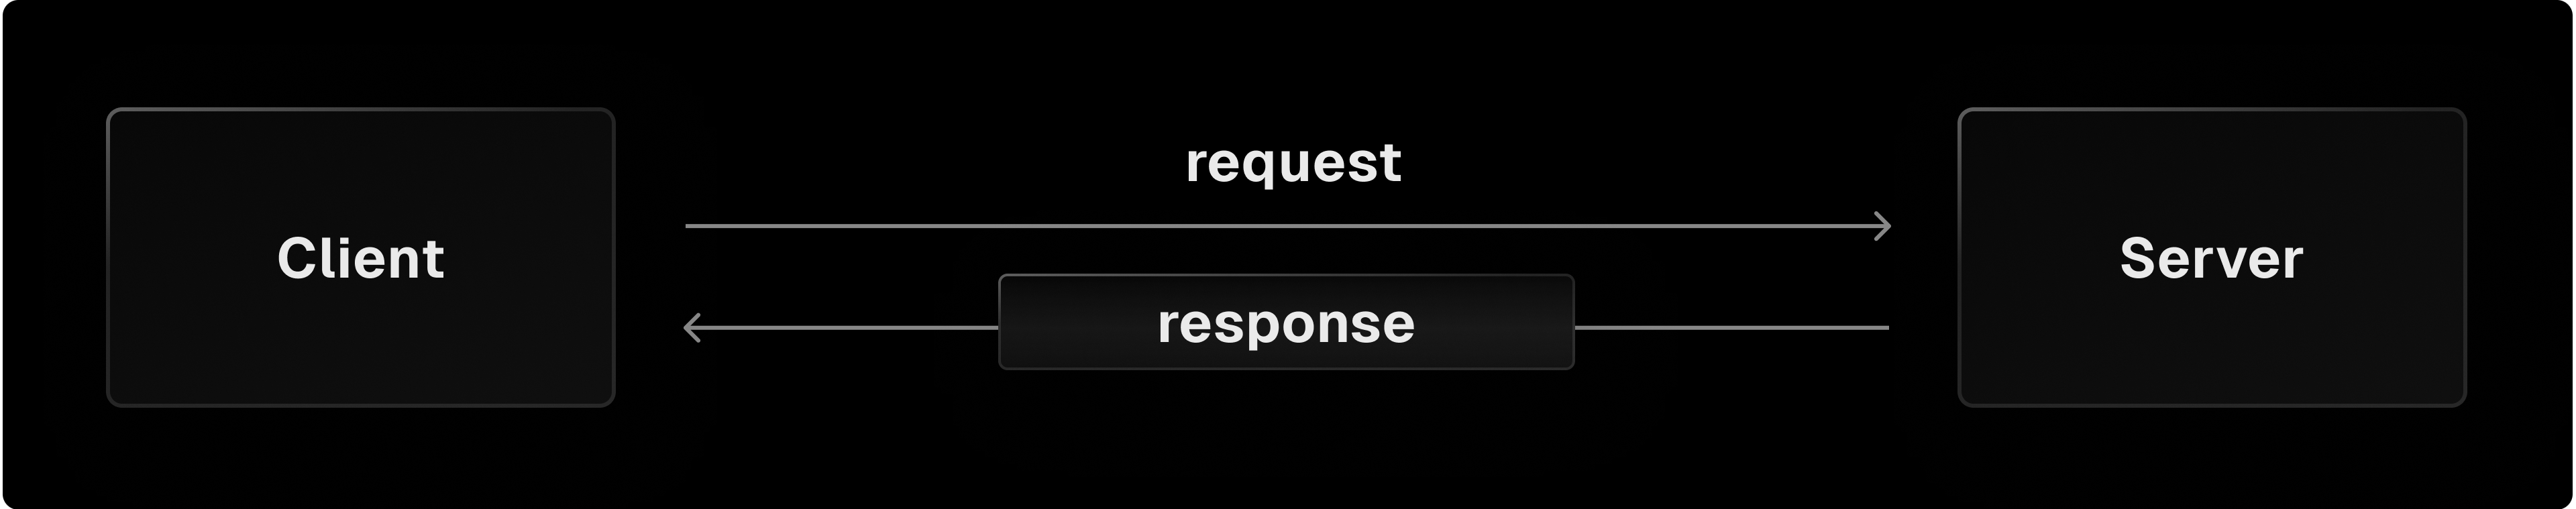 How responses and requests typically flow between client and server, with the response sent in one large batch.